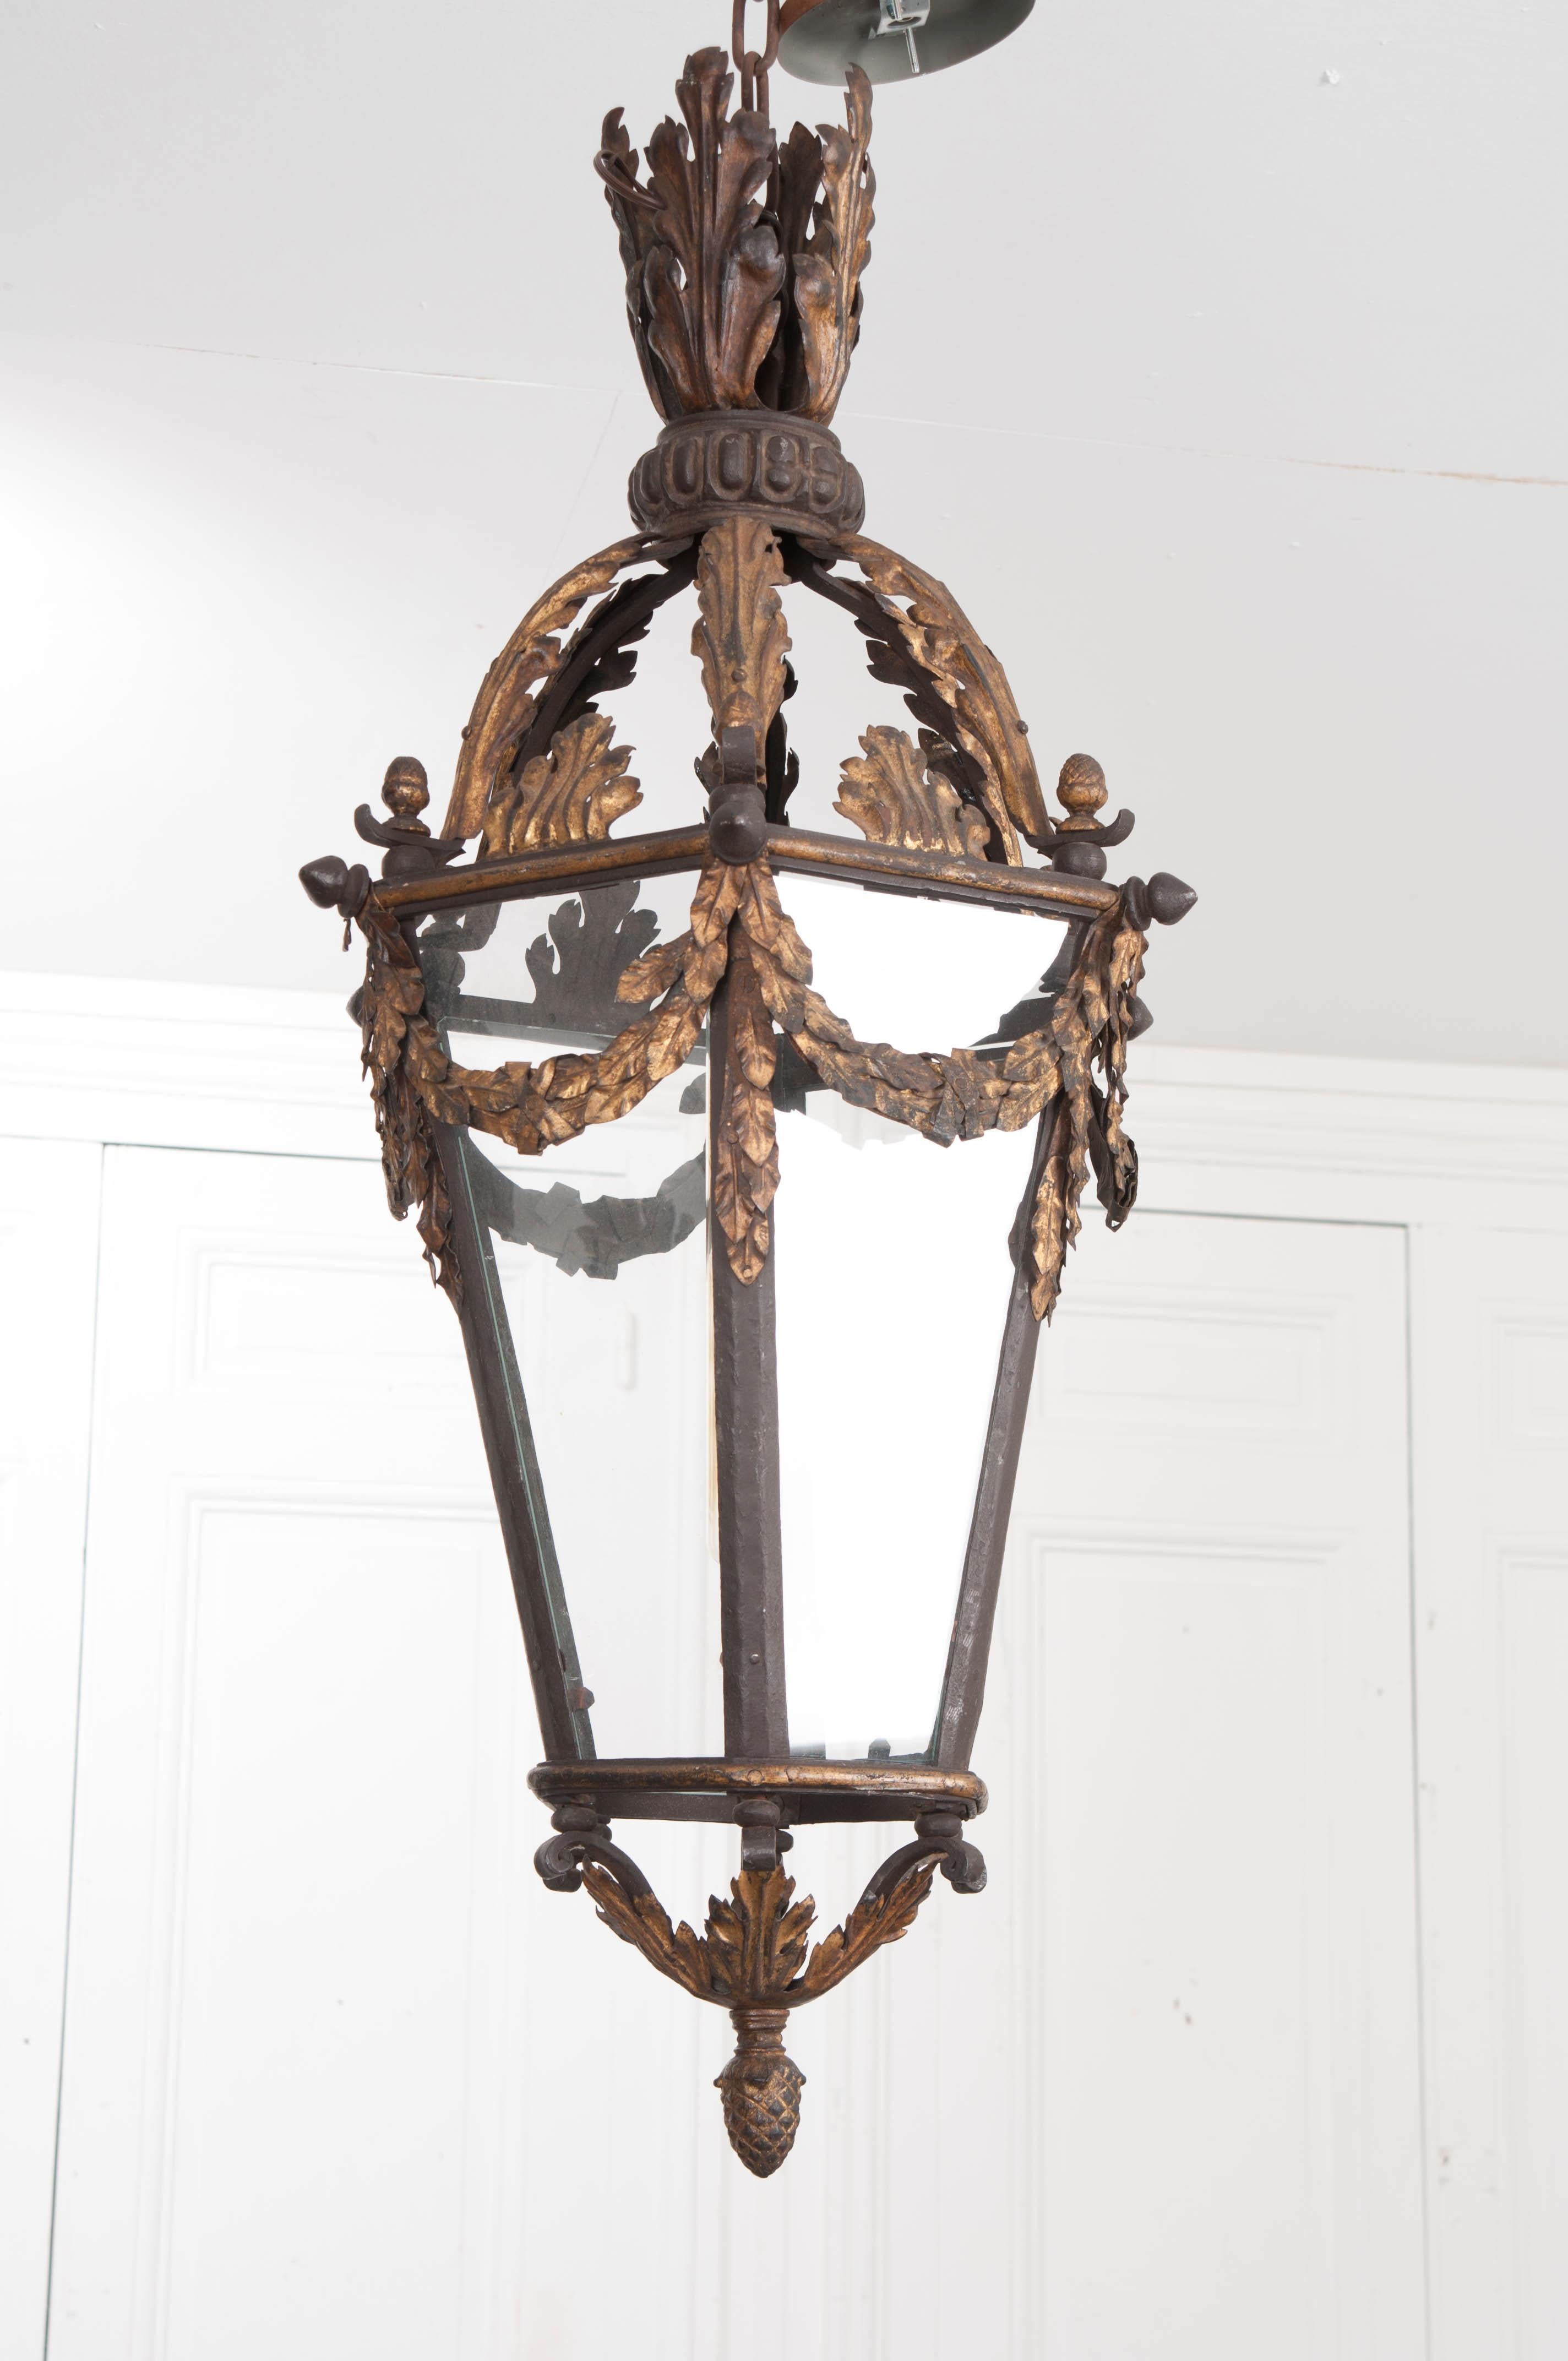 This French 19th century iron and gilt-brass single-light lantern, has been cleaned, wired for the United States, and features a modern tube light – a nice juxtaposition for the antique!